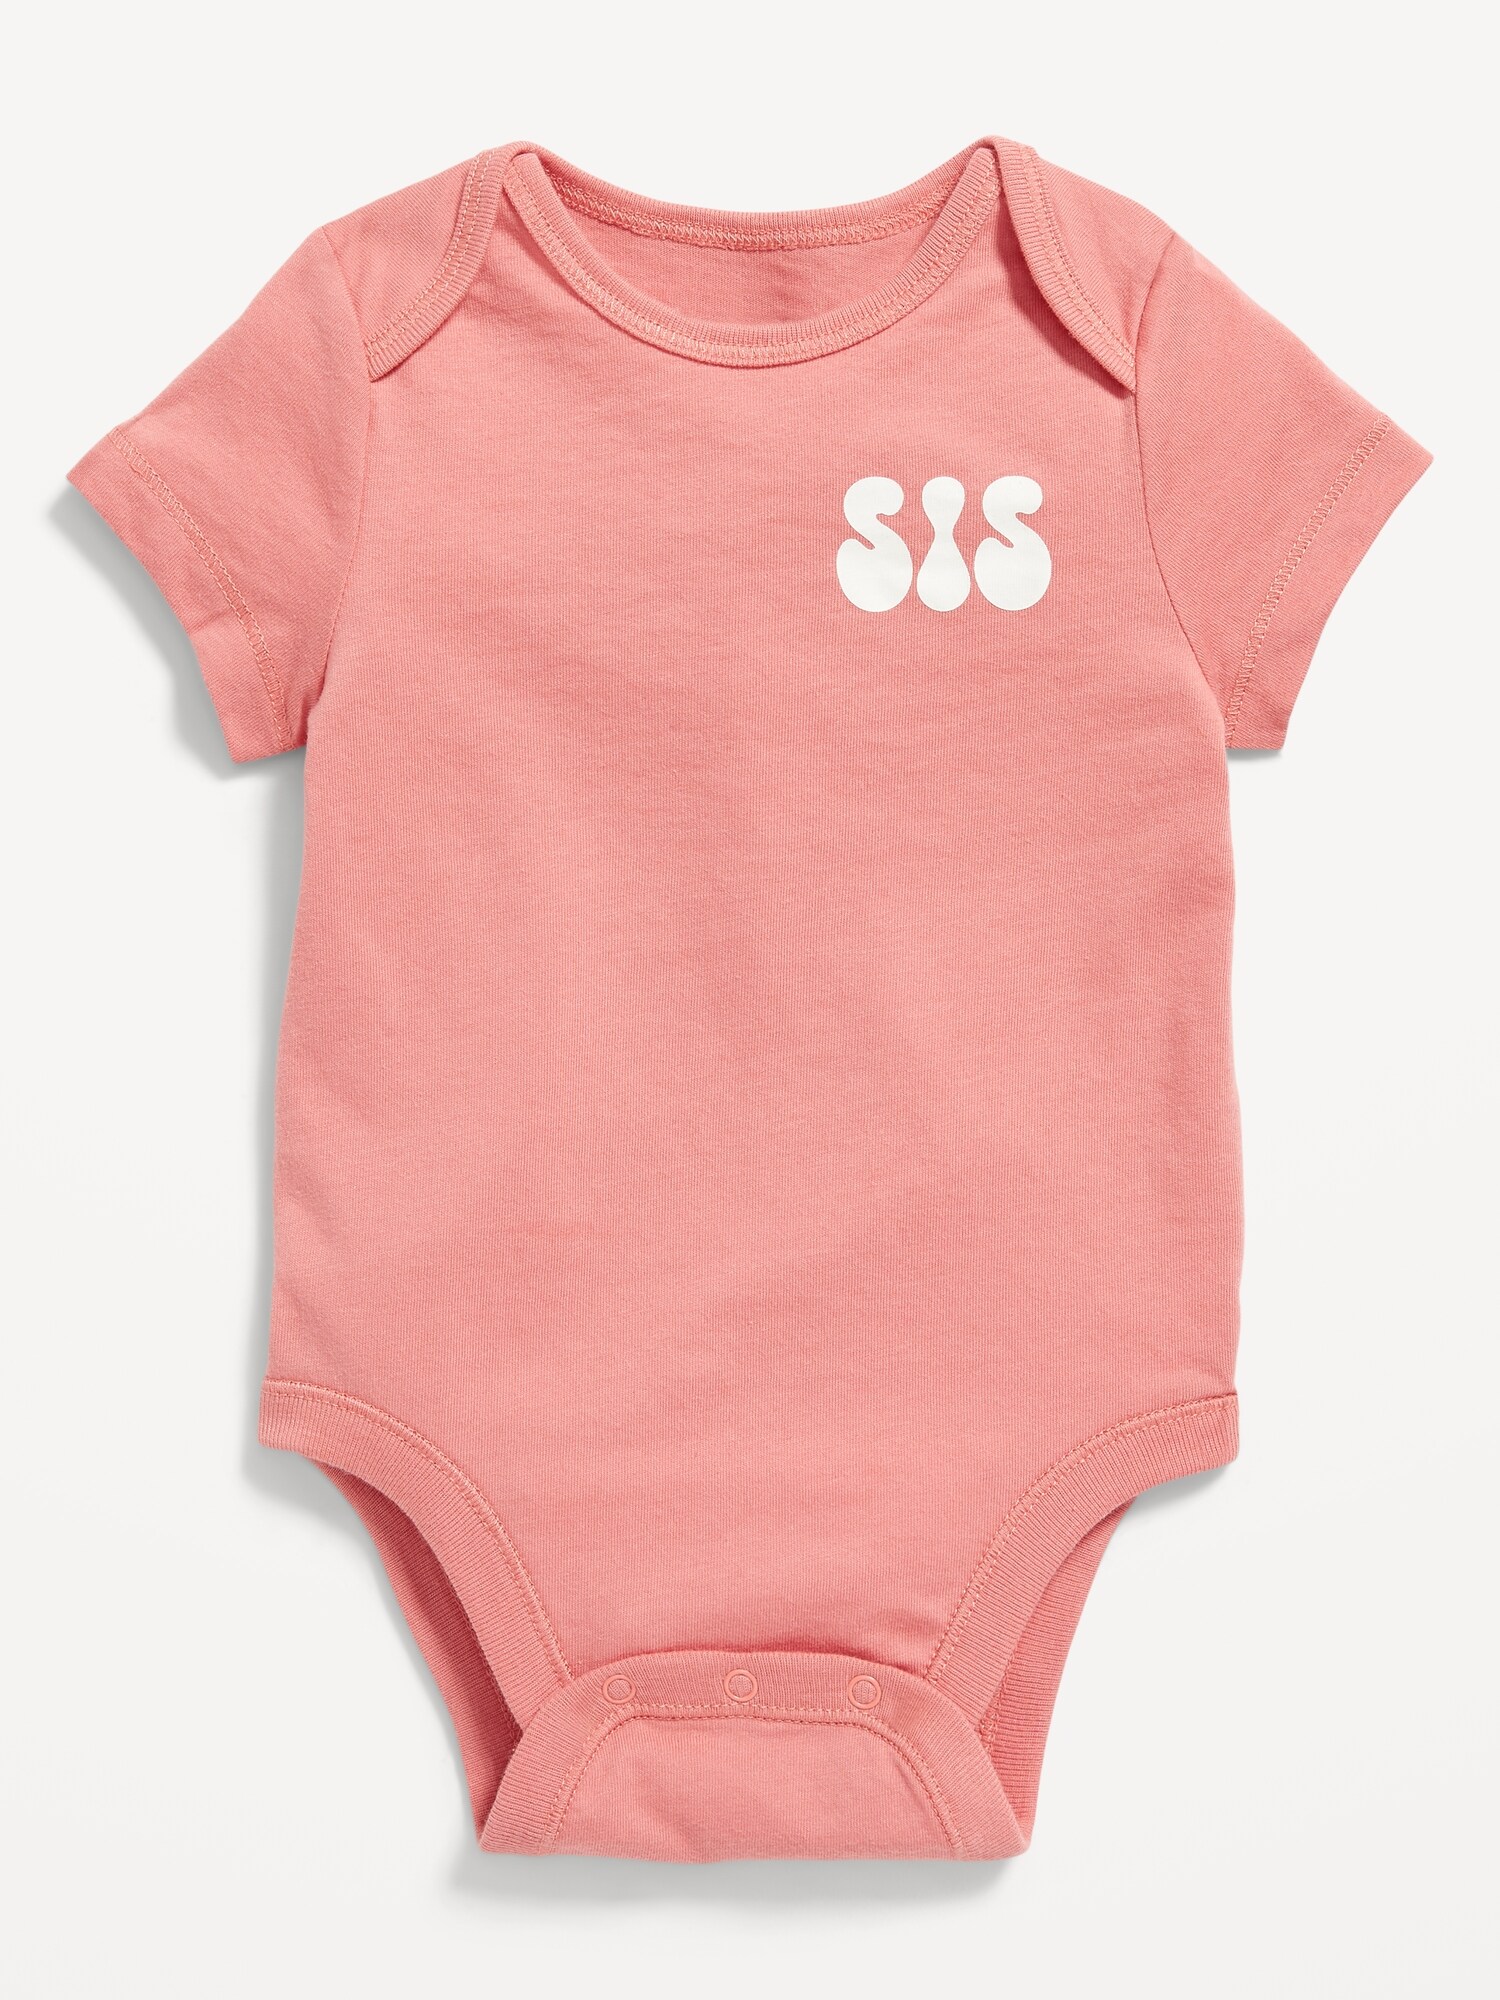 Old Navy Short-Sleeve Matching "Sis" Graphic Bodysuit for Baby multi. 1